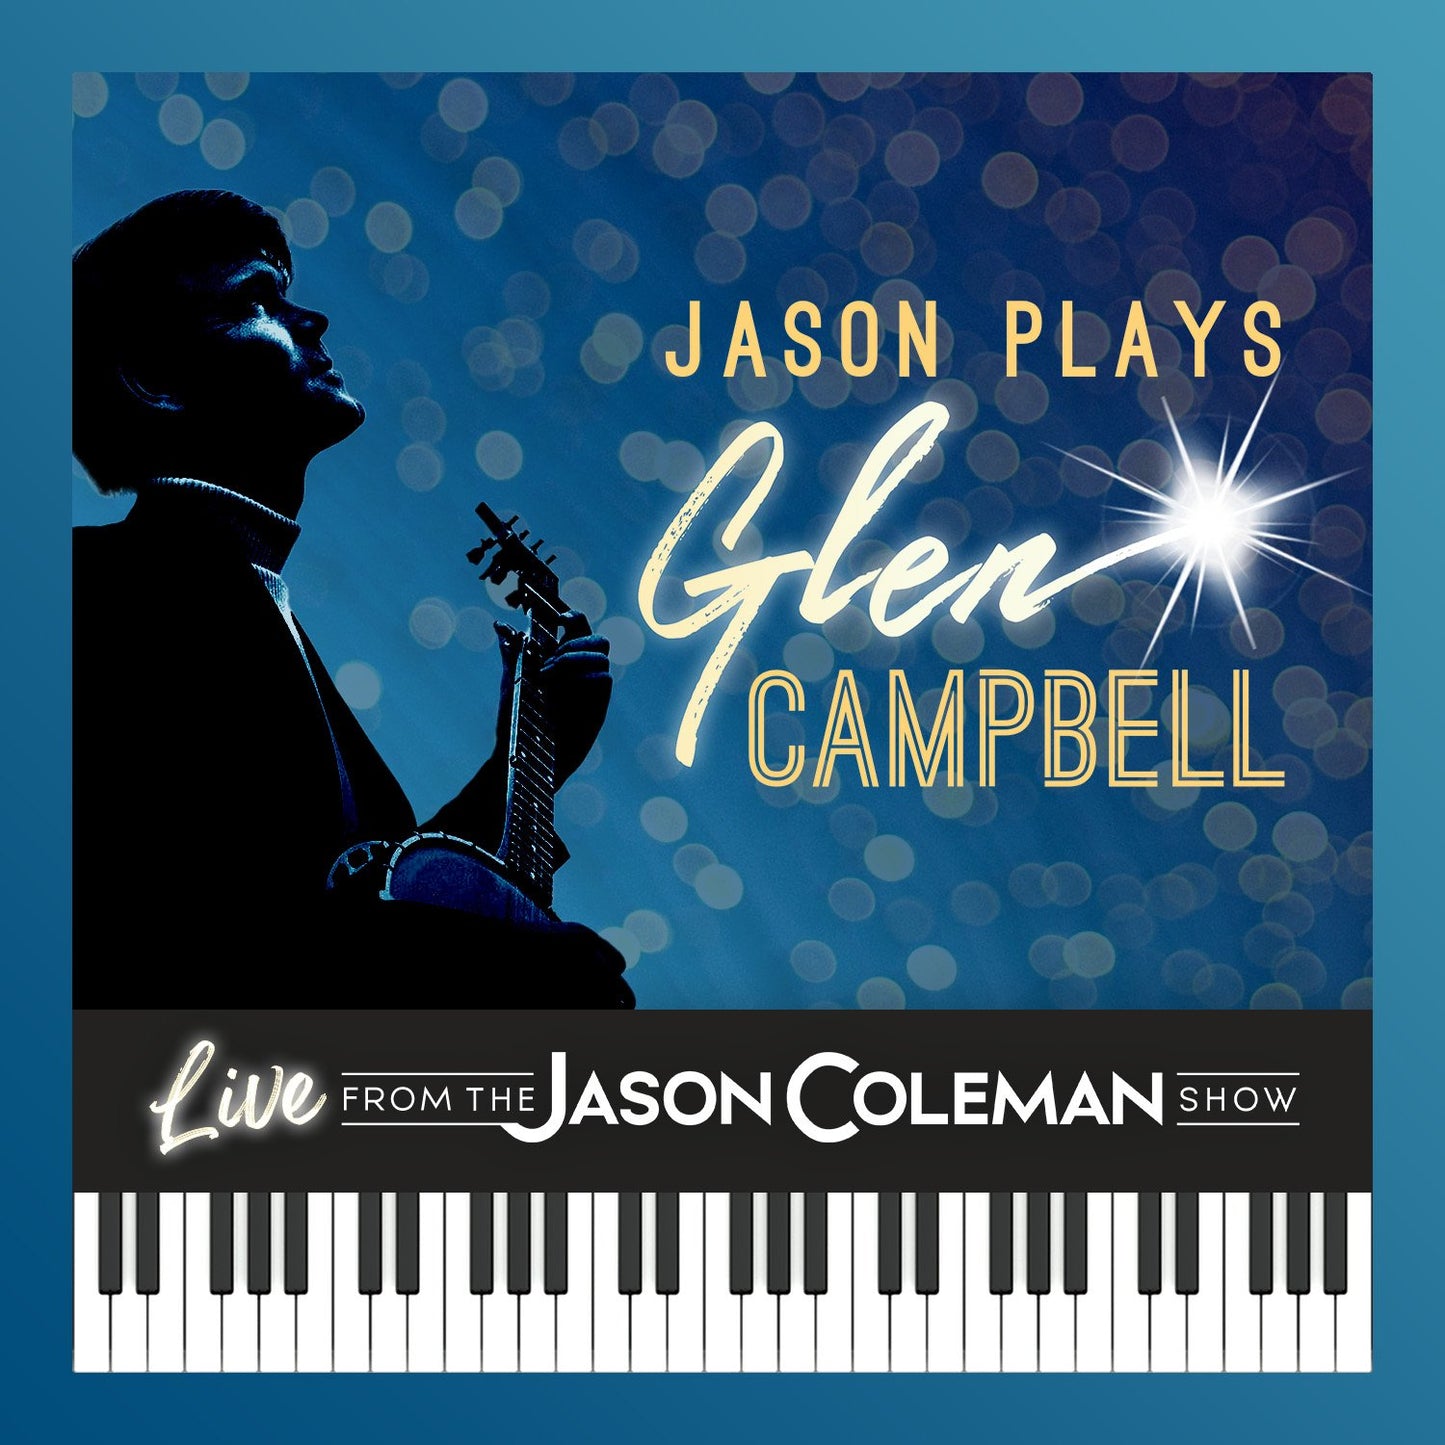 Jason Plays Glen Campbell CD (Live from The Jason Coleman Show)